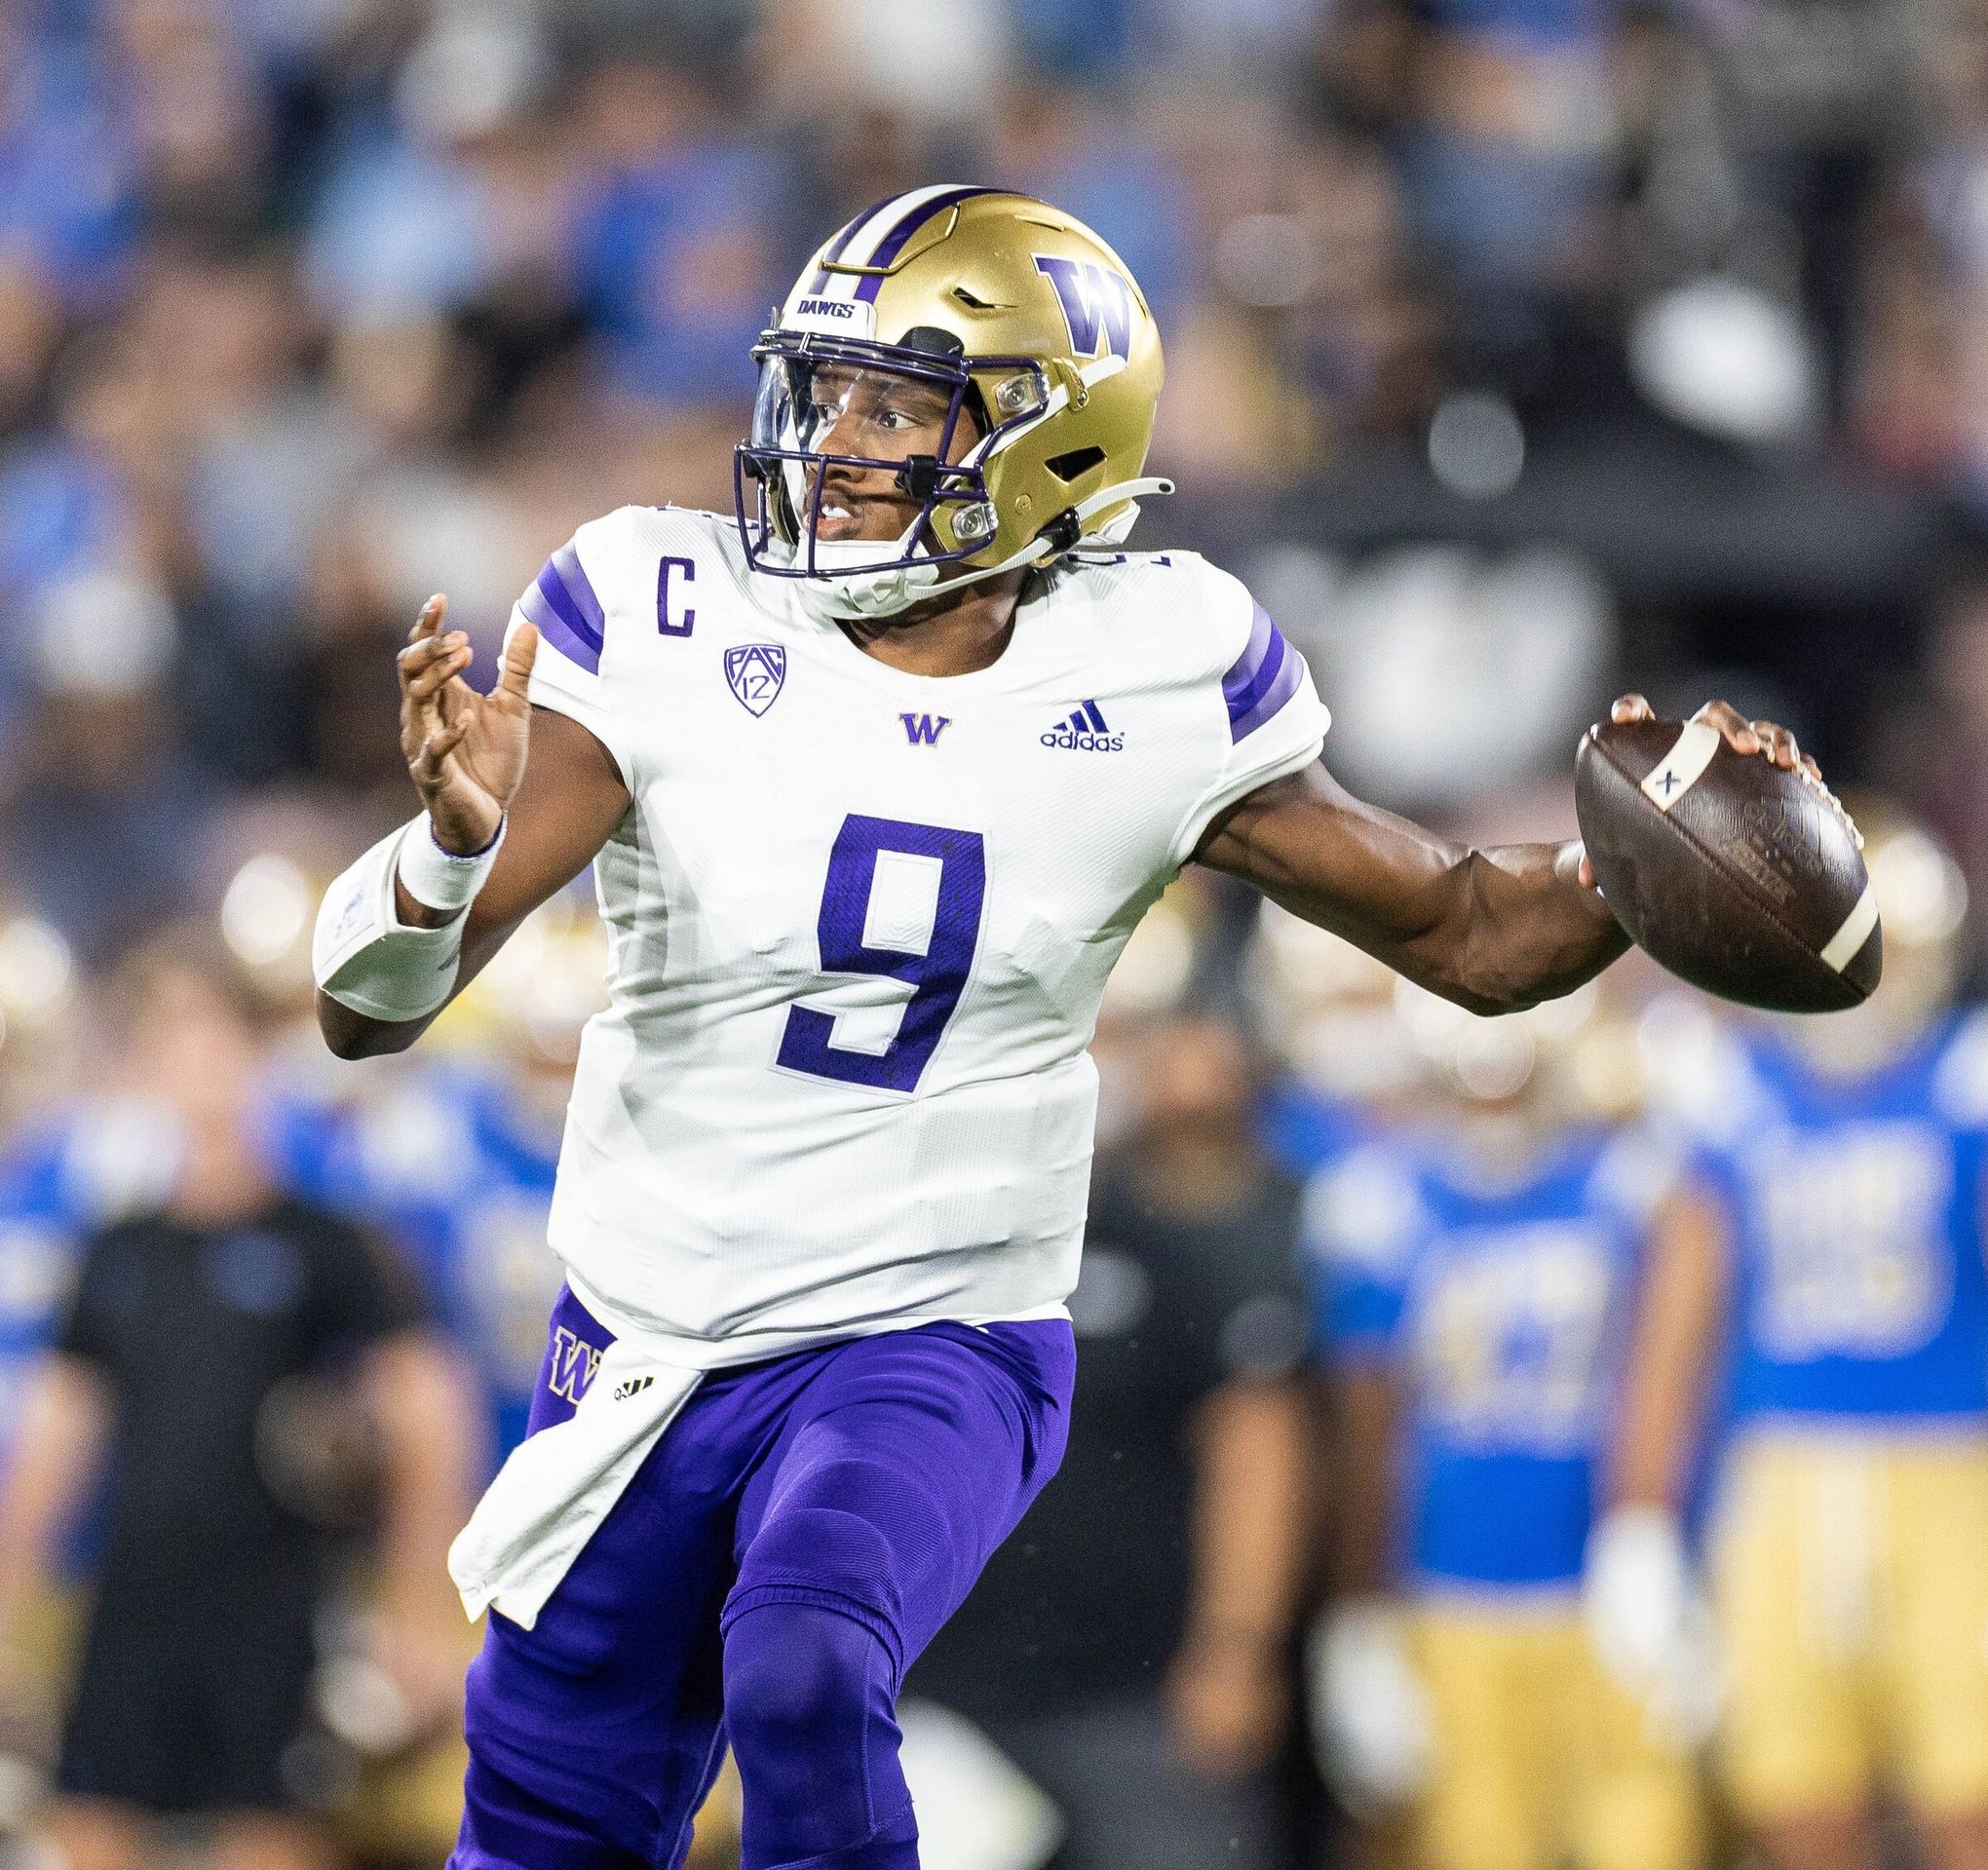 Examining the line between courage and calamity for standout UW QB Michael Penix Jr.